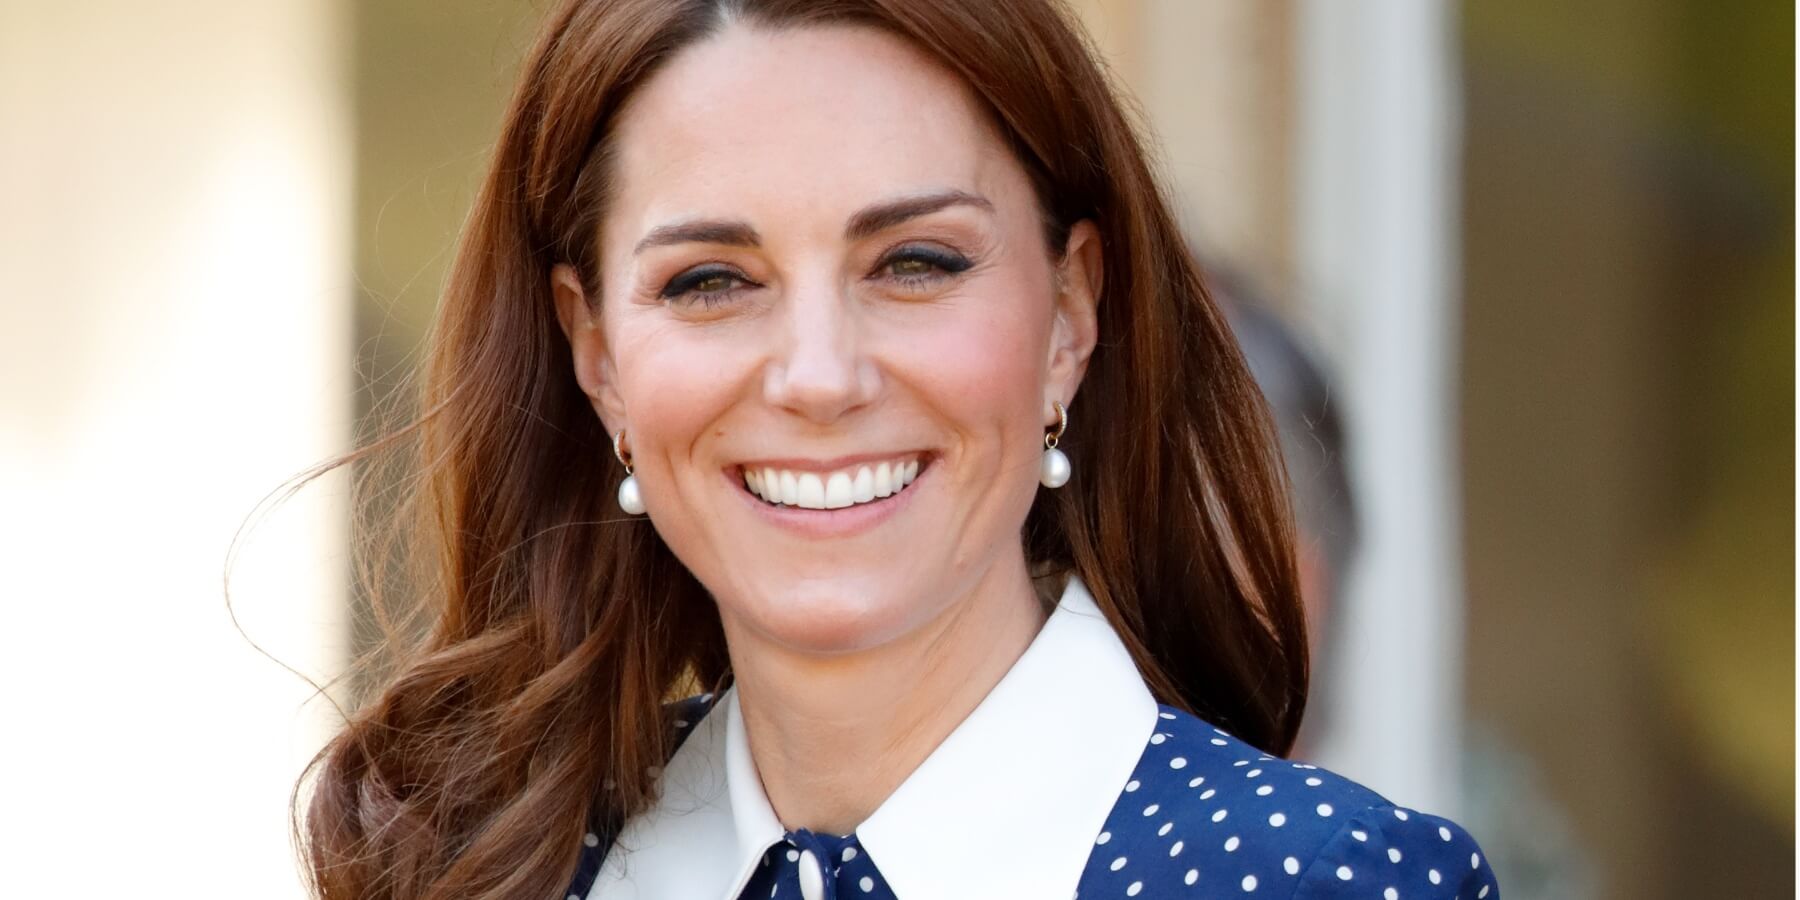 Kate Middleton's recovery period from her recent abdominal surgery could keep her in the hospital for upwards of two weeks